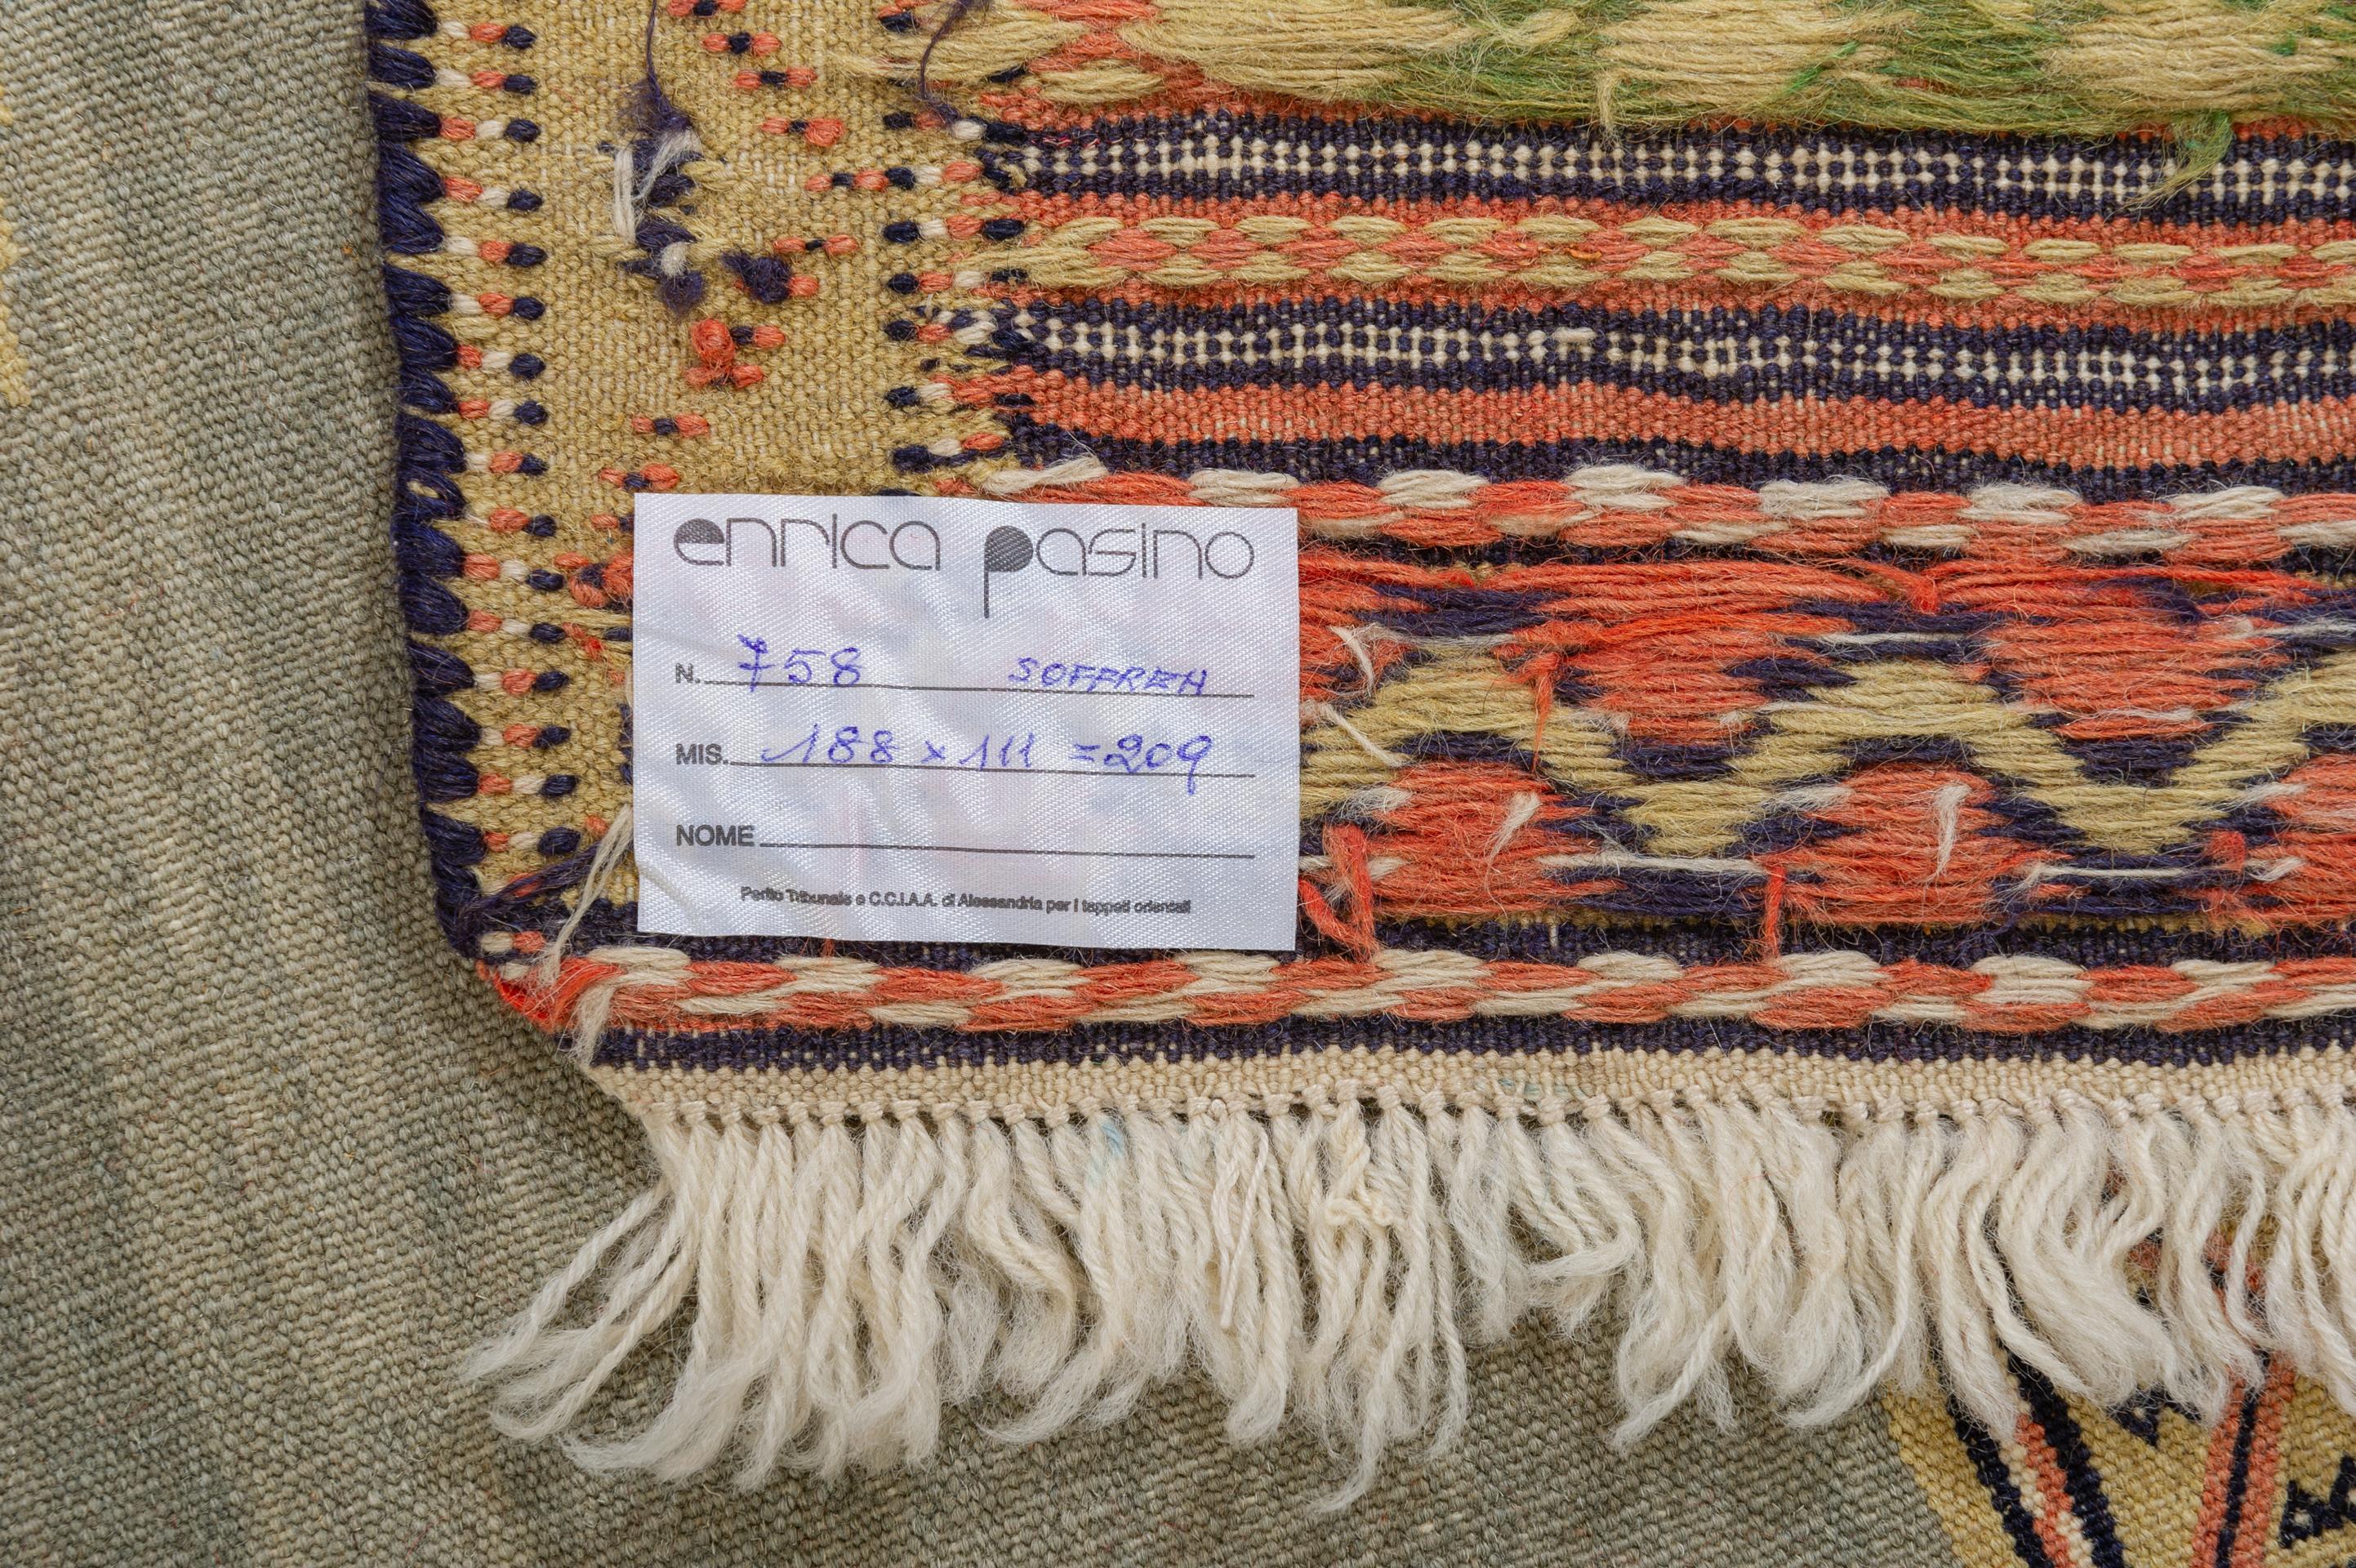 nr. 758 - This type of kilim are used as tablecloths on the ground: its name is 